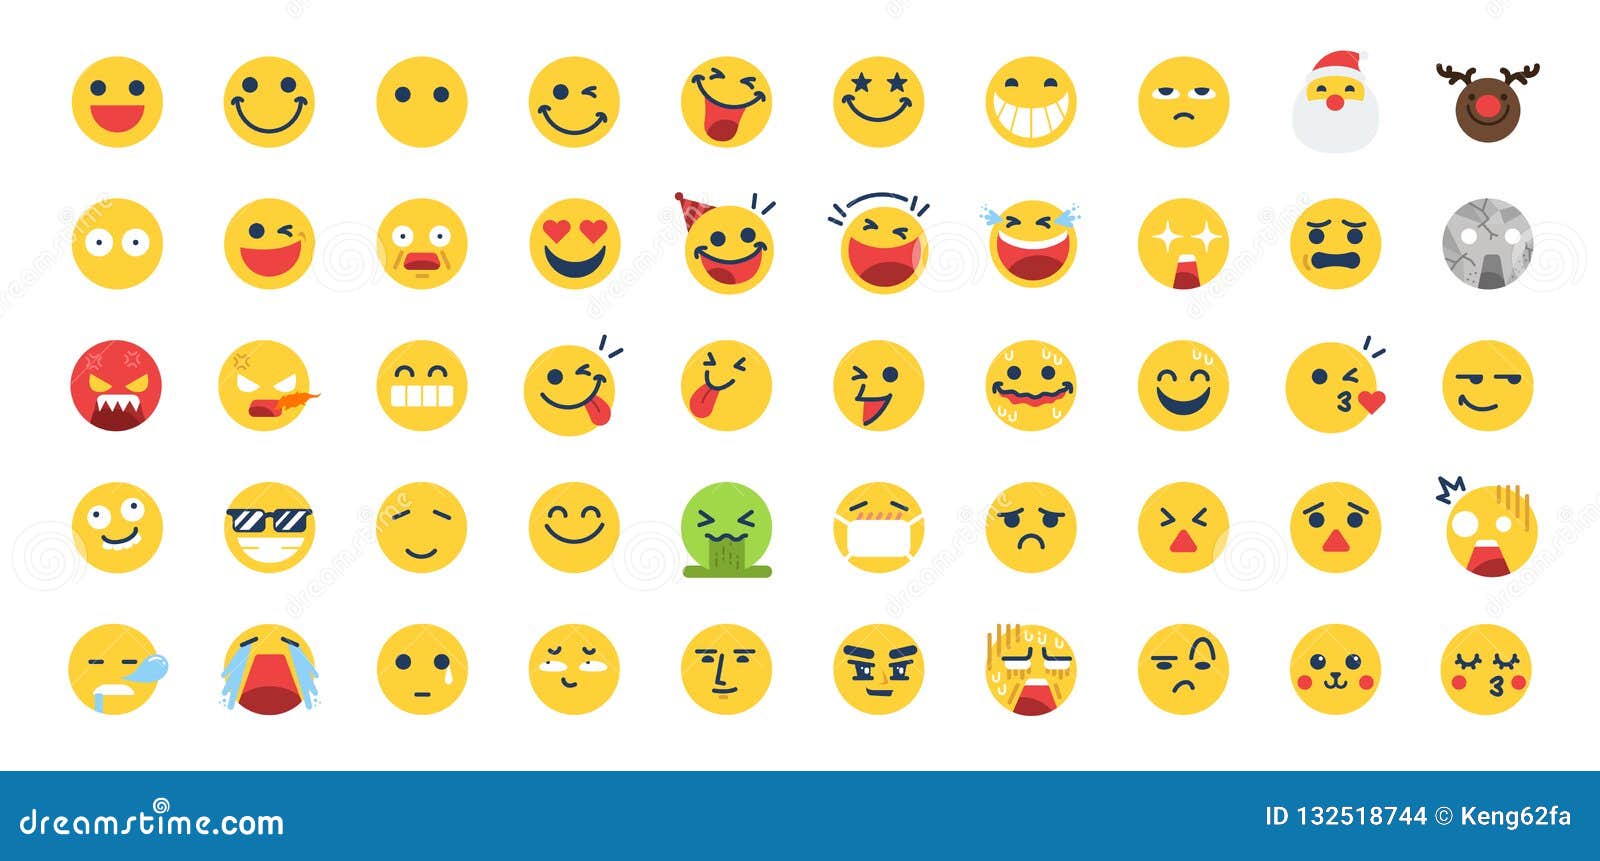 50 emoji icon set. included the icons as happy, emotion, face, feeling, emoticon and more.